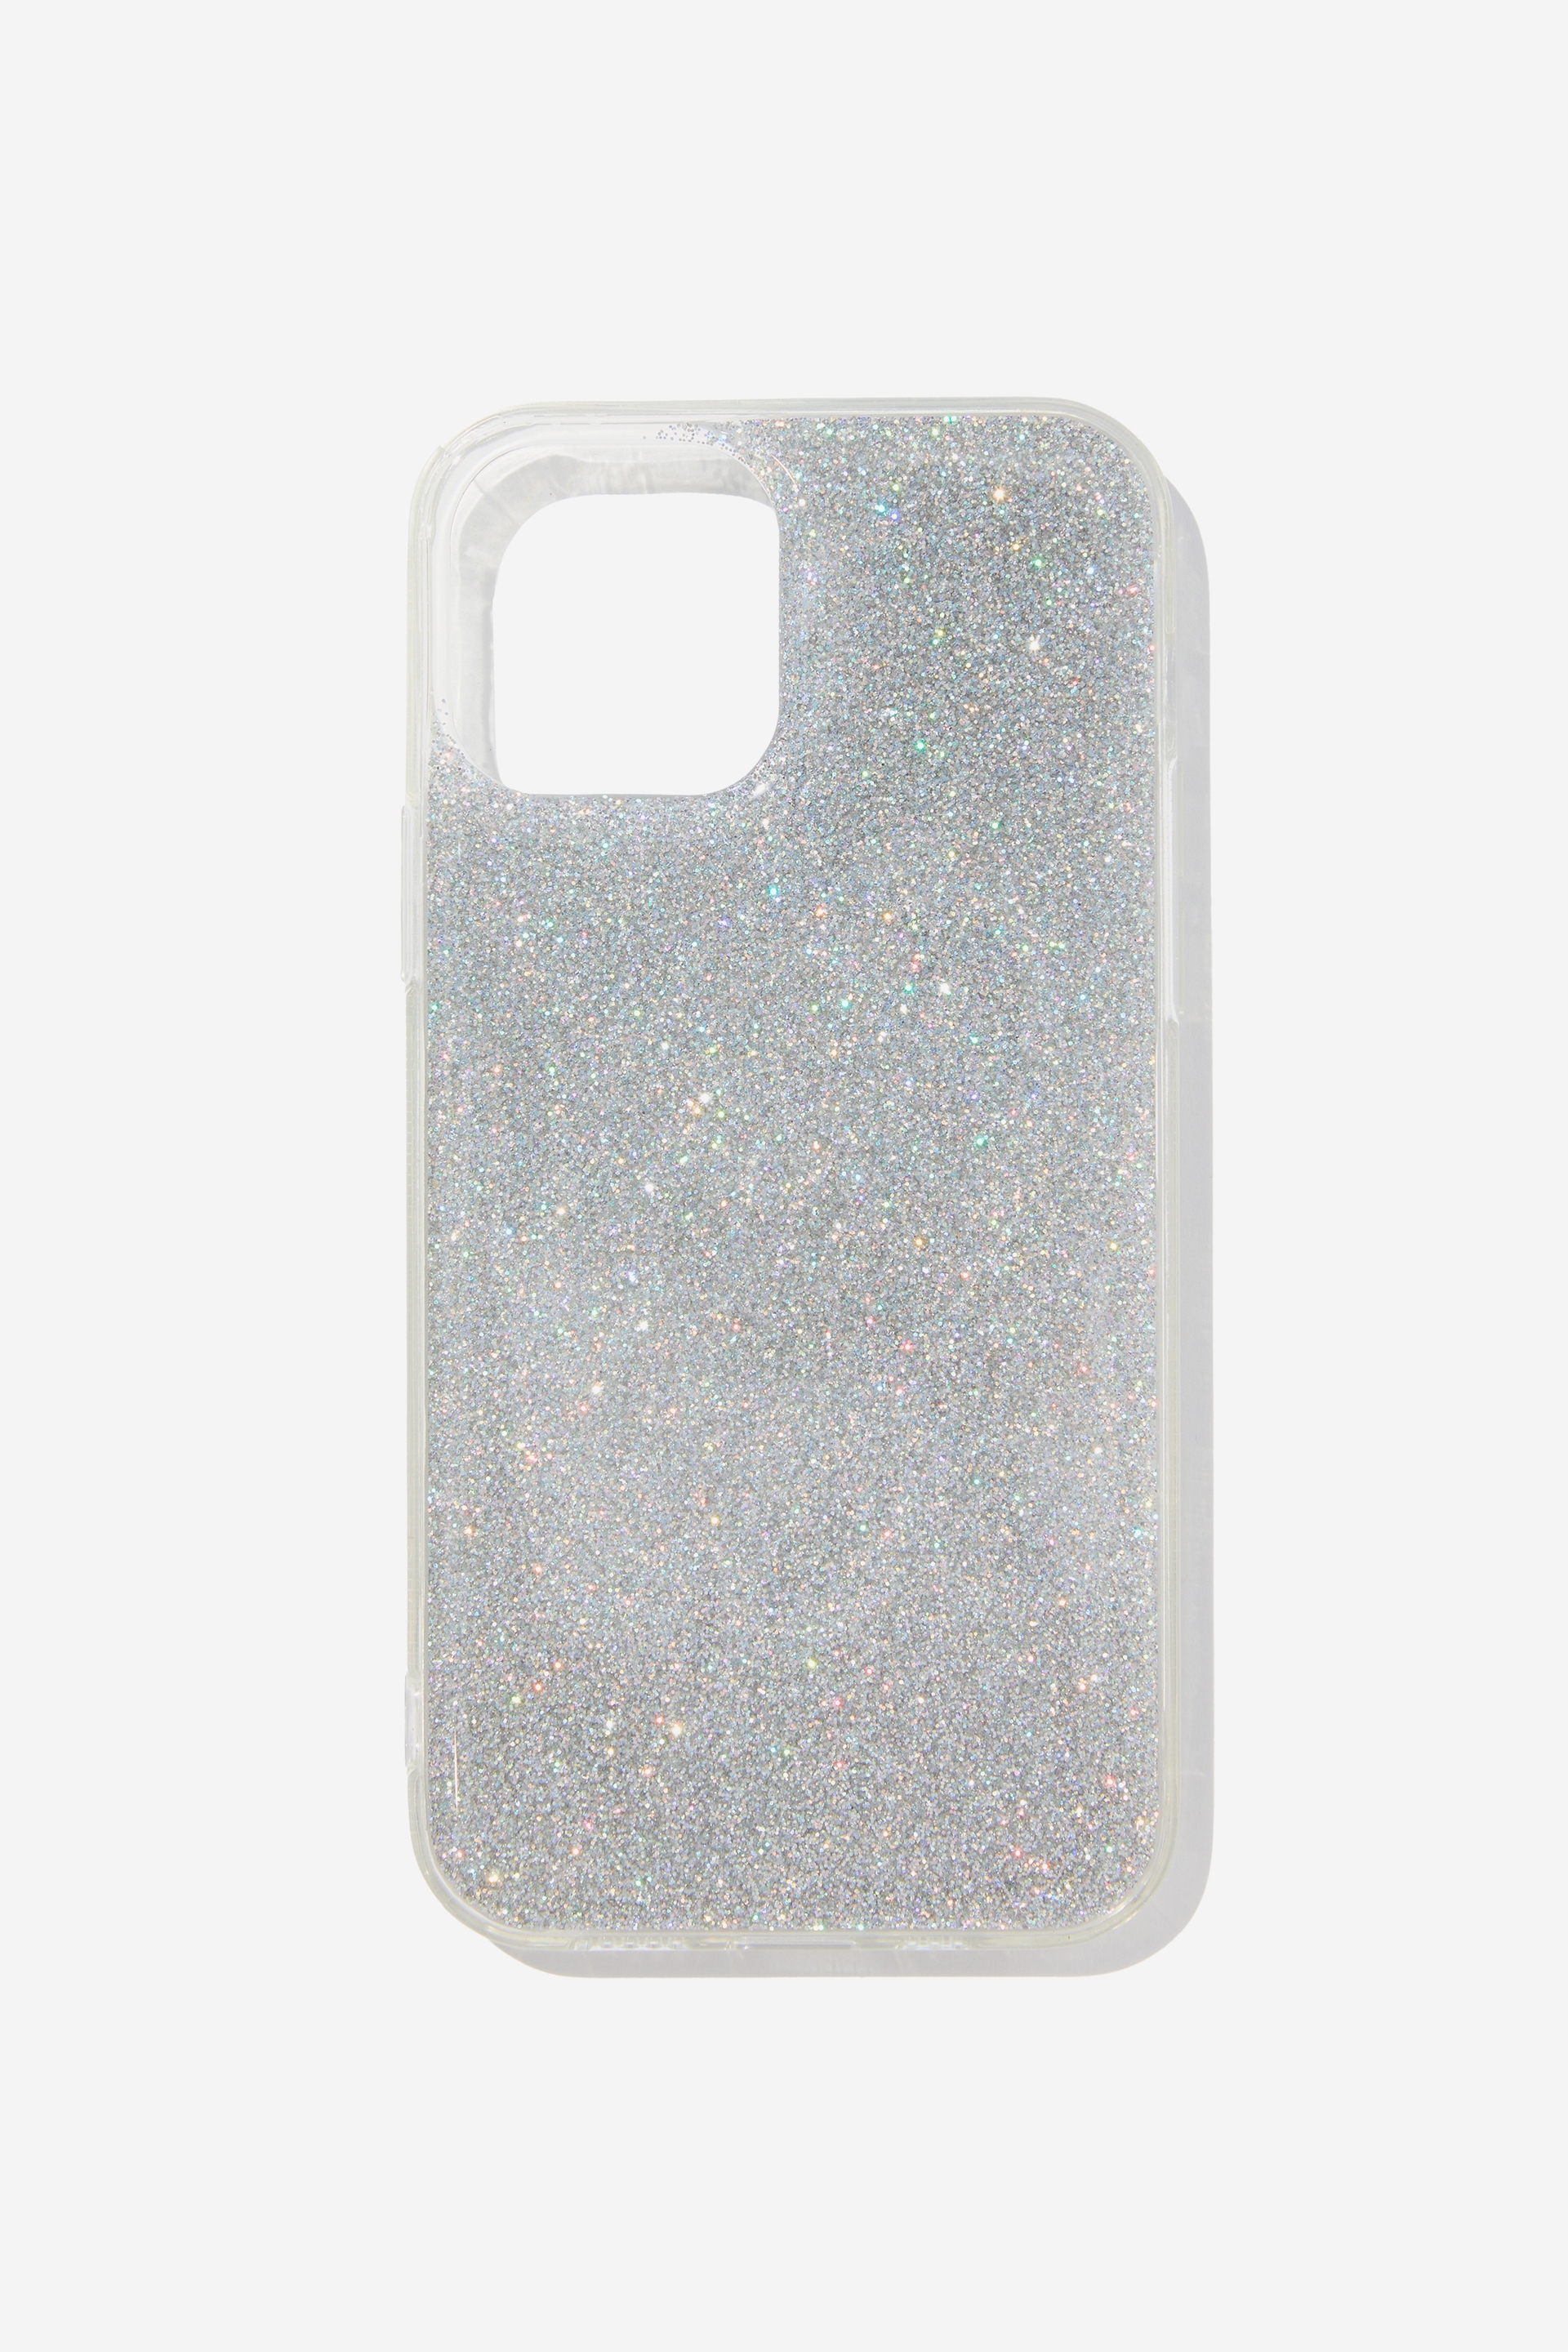 Typo - Protective Phone Case Iphone 12, 12 Pro - Silver glitter